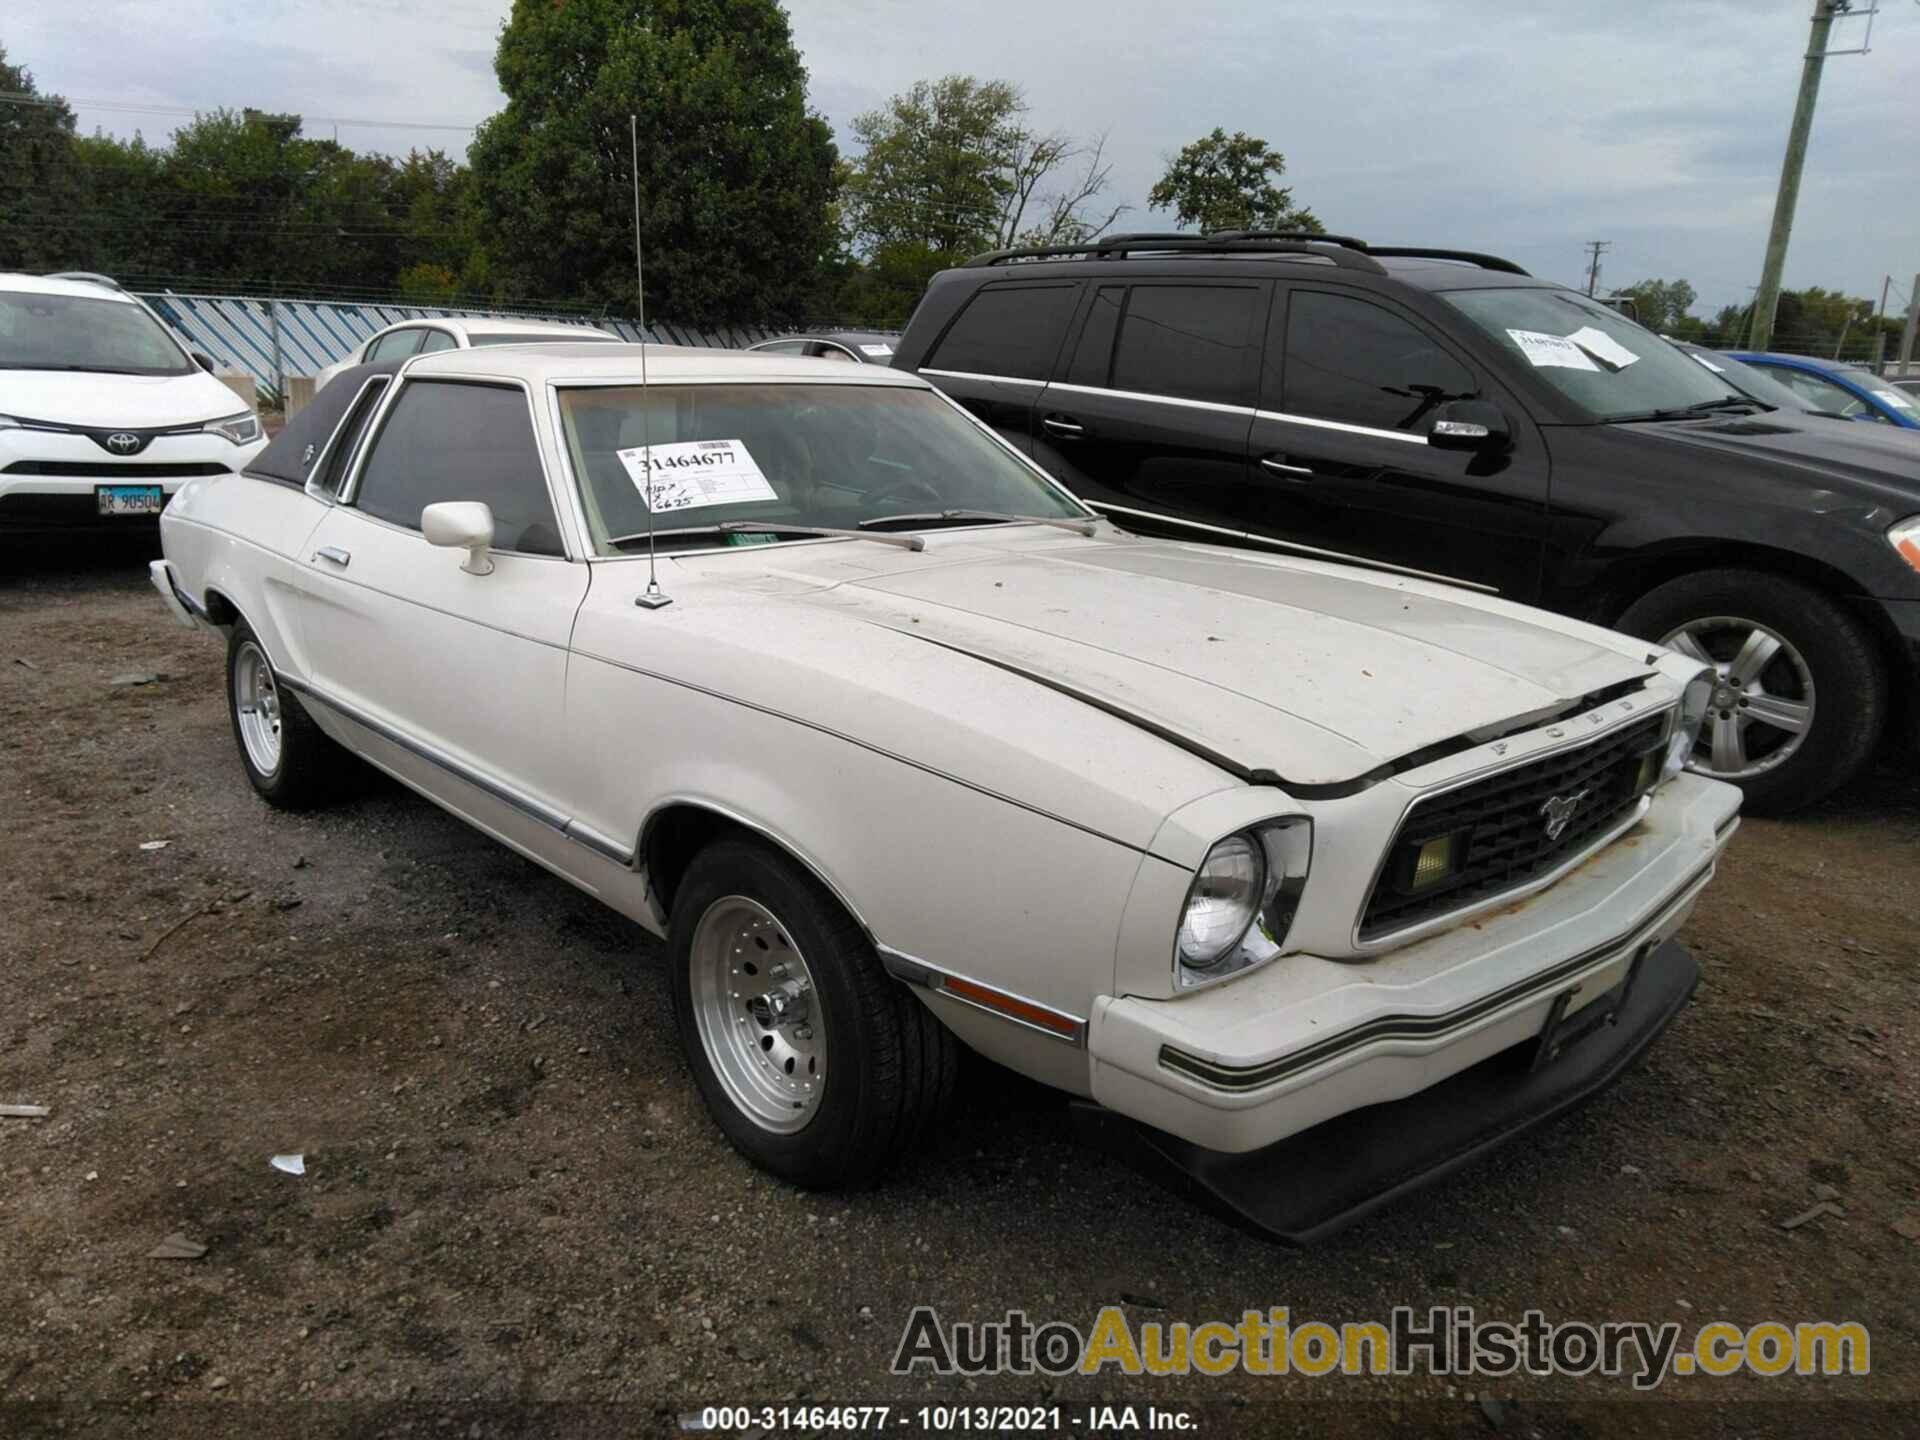 FORD MUSTANG, 8F04Z251426